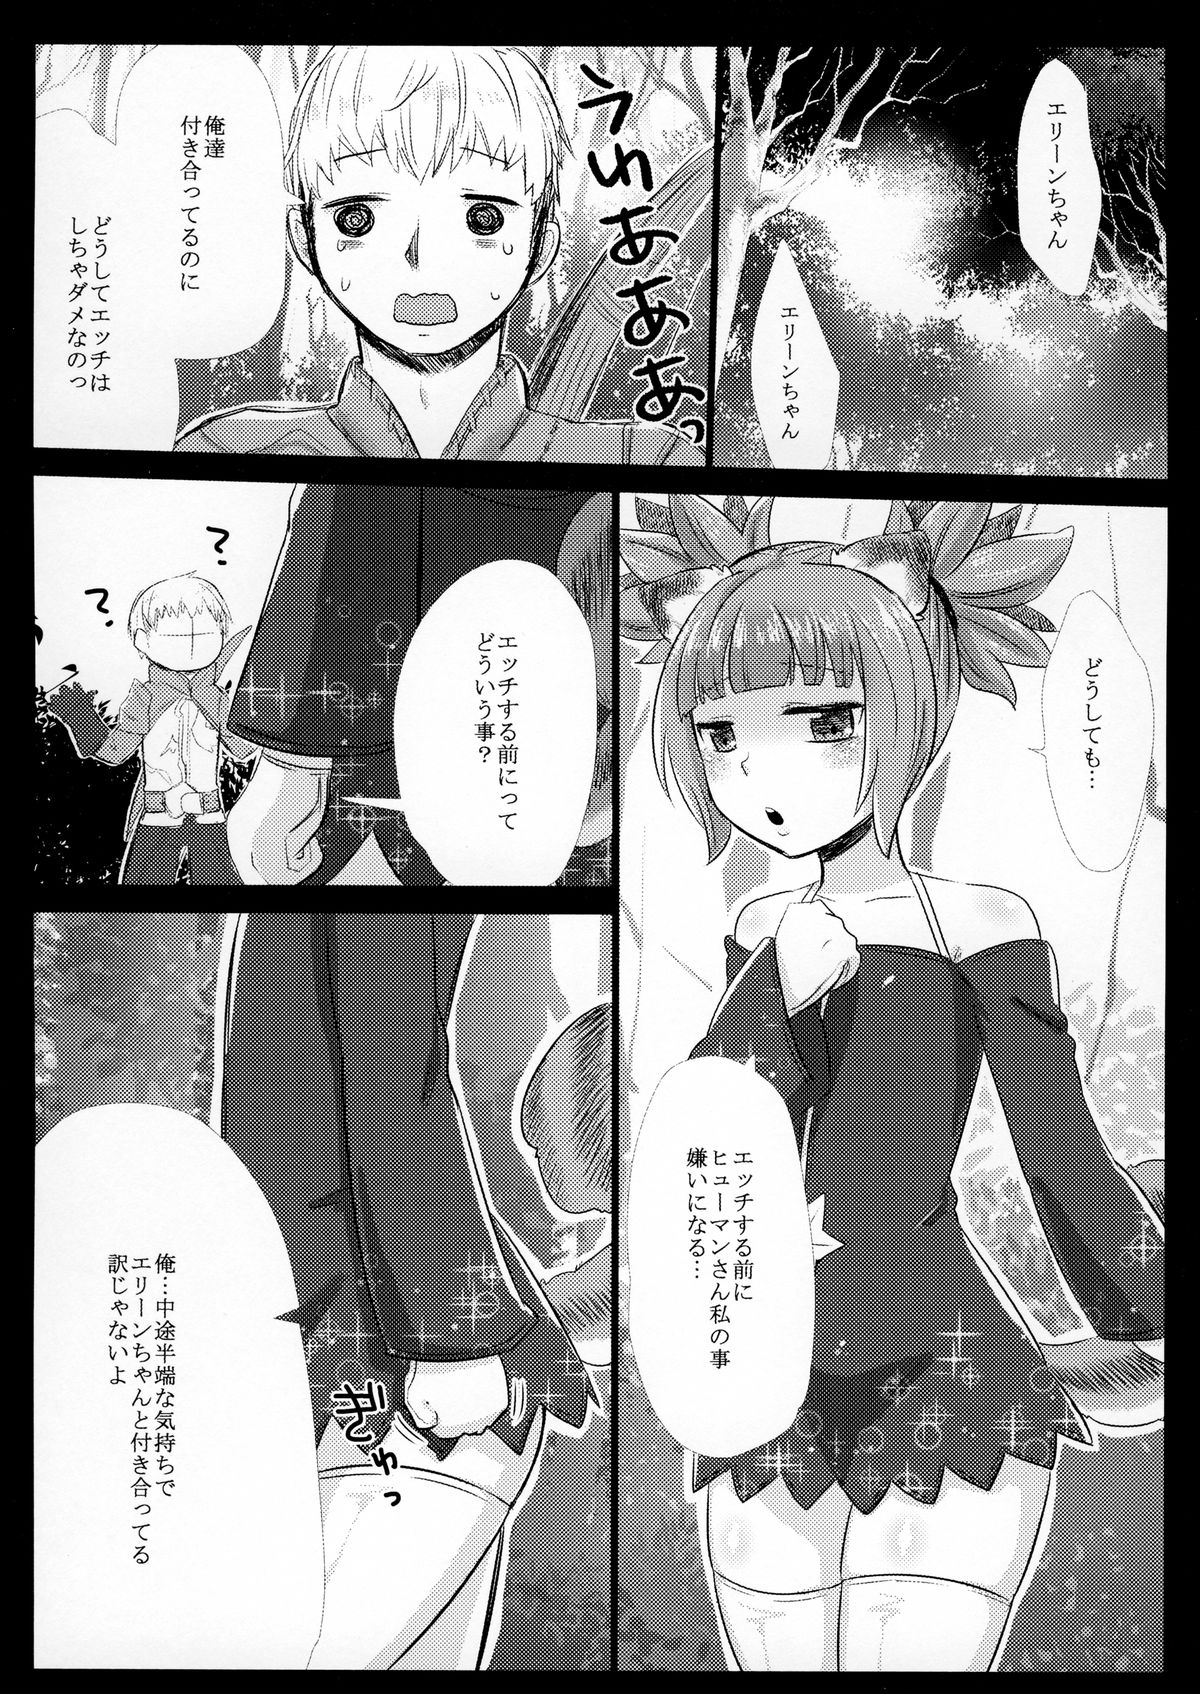 (C86) [GumiSyrup (gumi)] Love ☆ Elin (TERA The Exiled Realm of Arborea) page 7 full